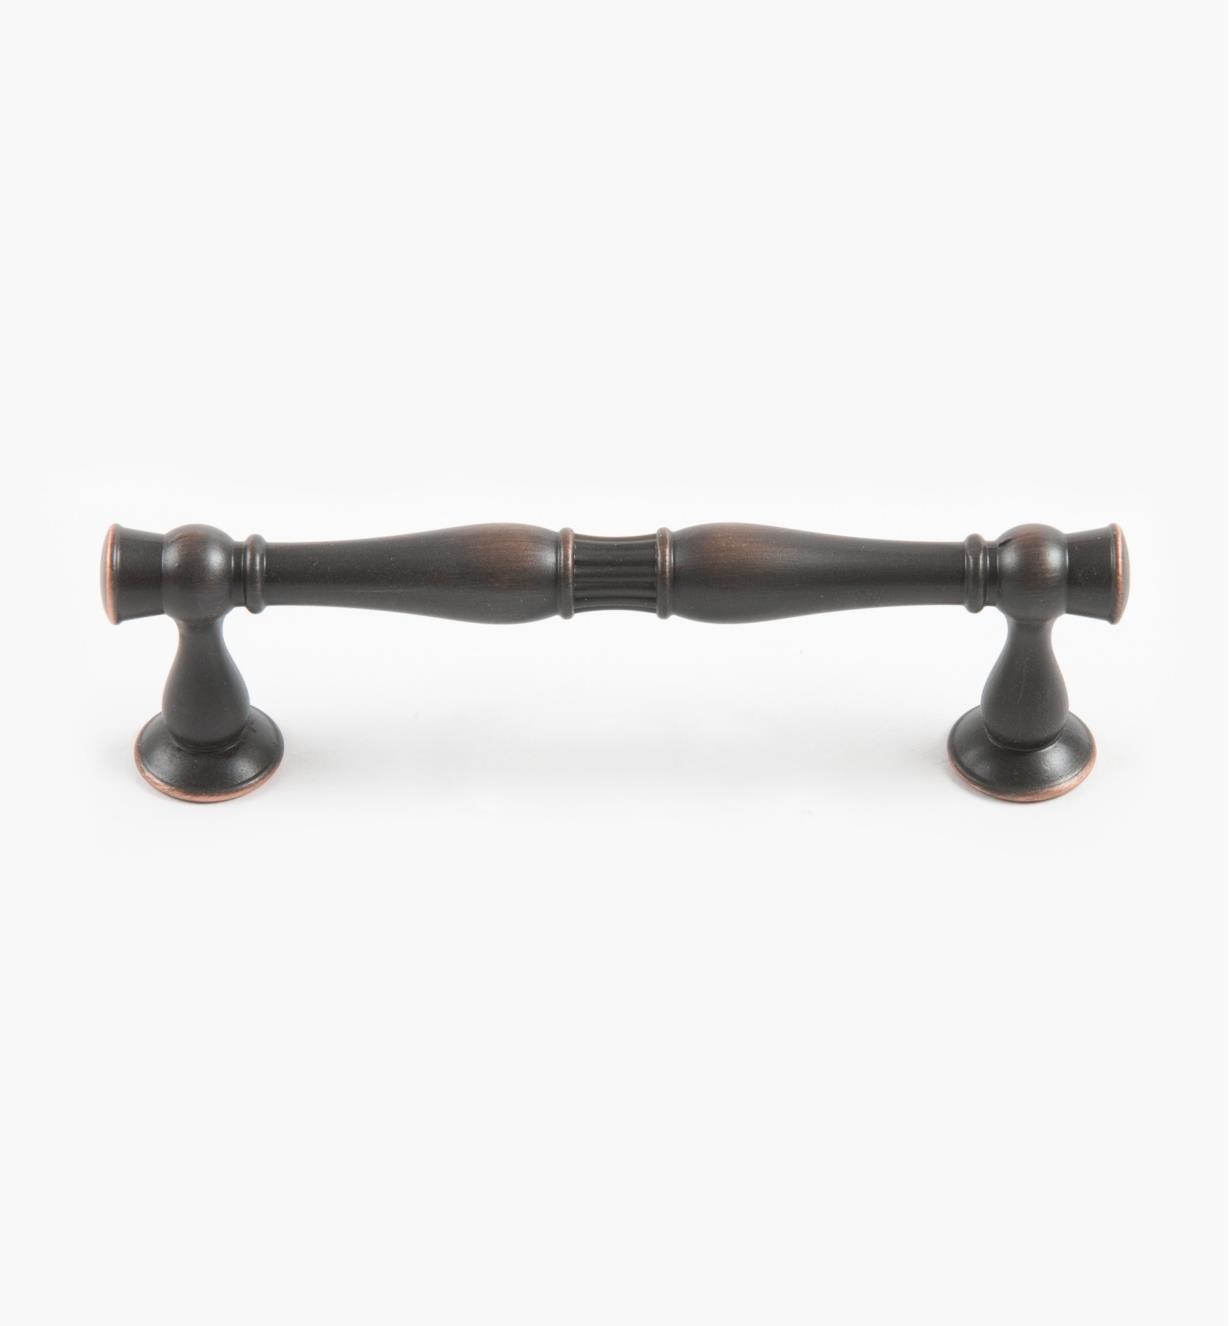 02A1577 - Crawford Oil-Rubbed Bronze 96mm x 35mm Handle, each